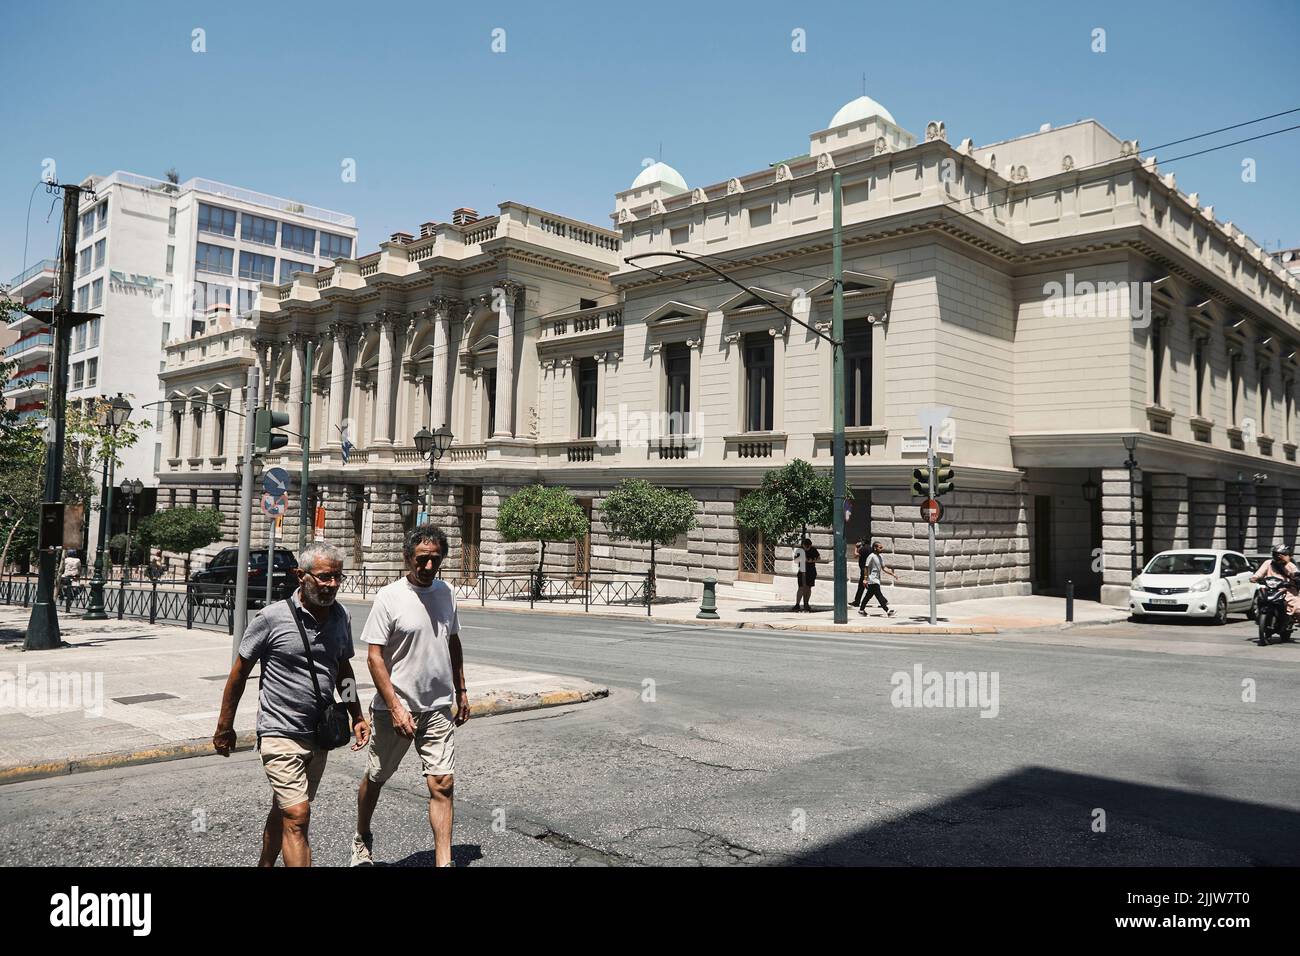 national theater greece Stock Photo